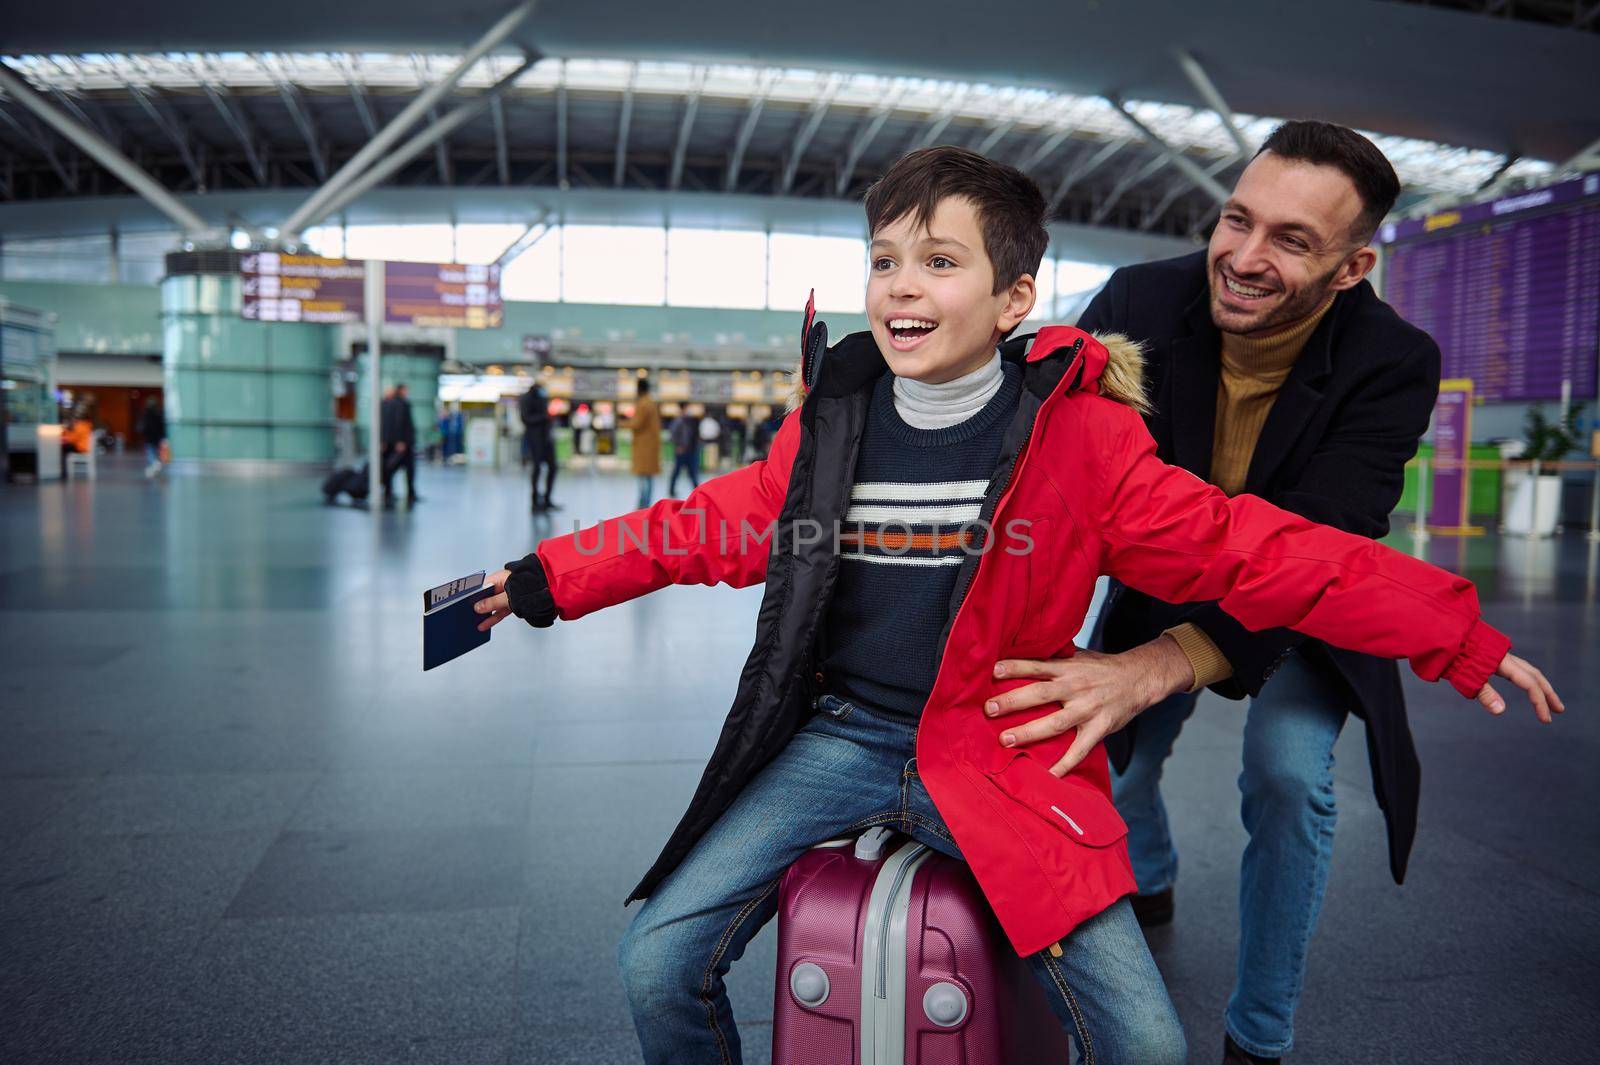 Charming little boy with a passport and a boarding pass in his outstretched hands while his dad is riding him on a suitcase in the departure hall of the airport, awaiting check-in for a flight